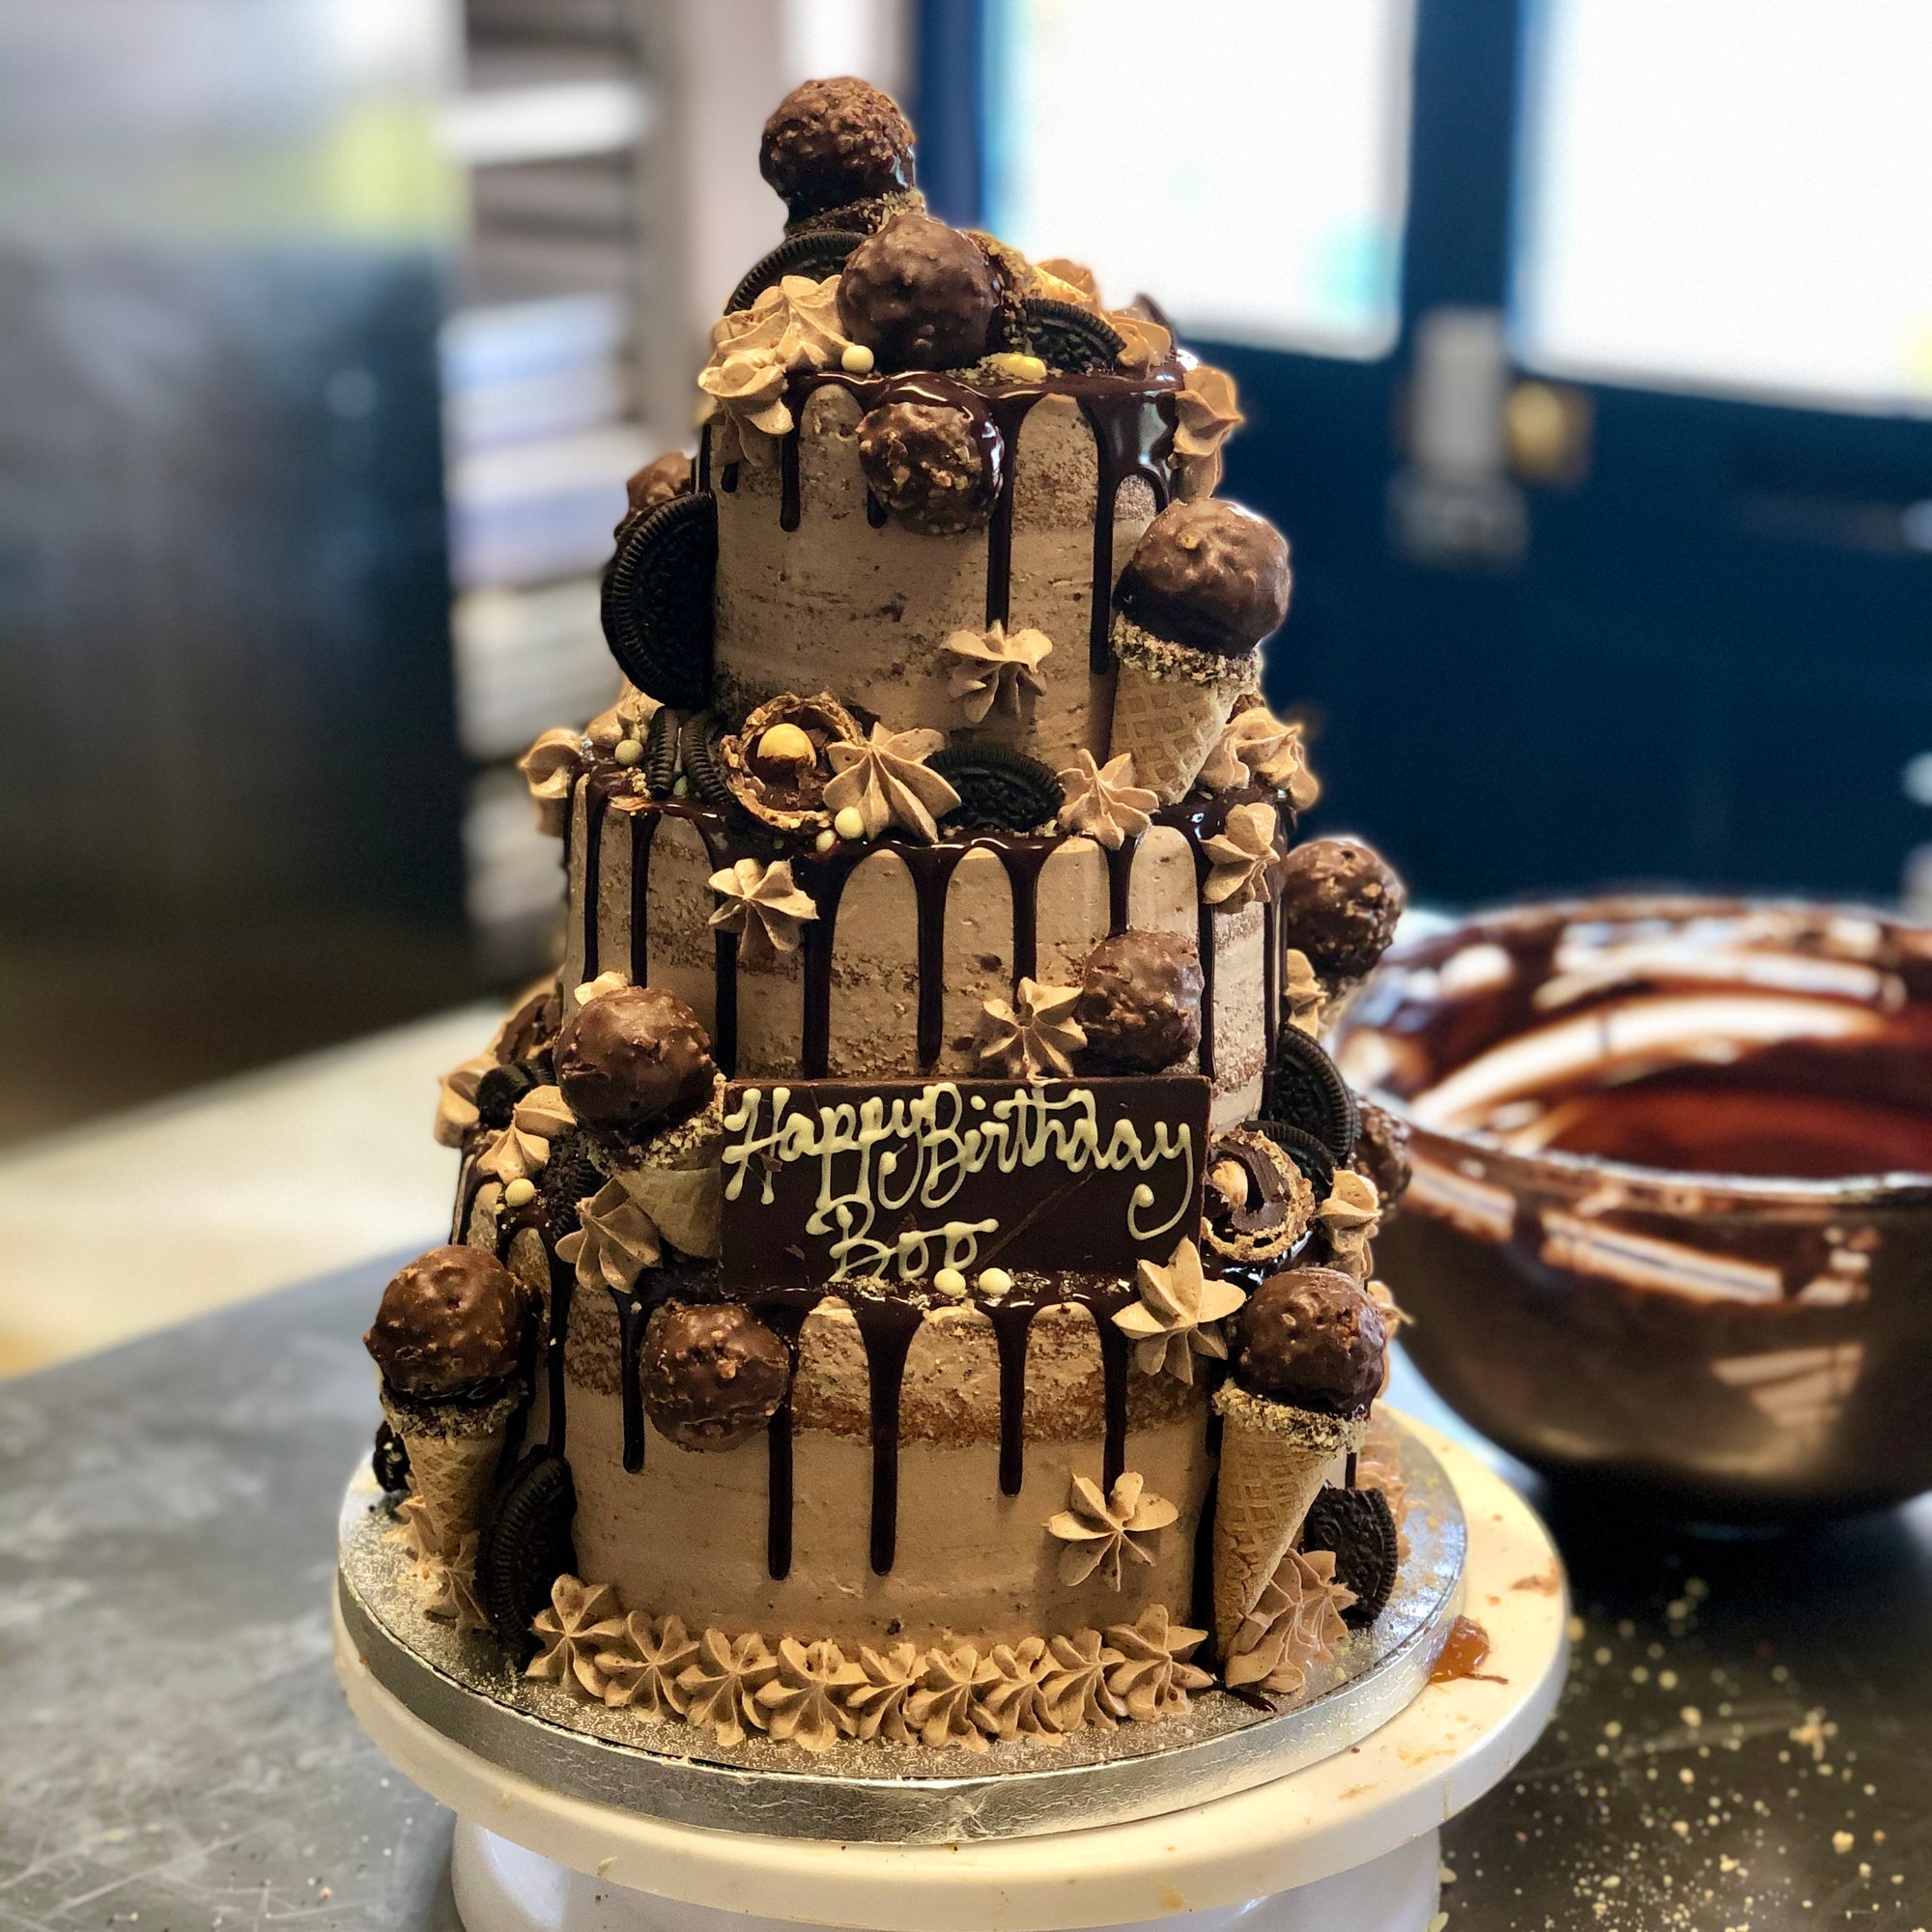 Nutella Chocolate Birthday Cake Delivery Bromley